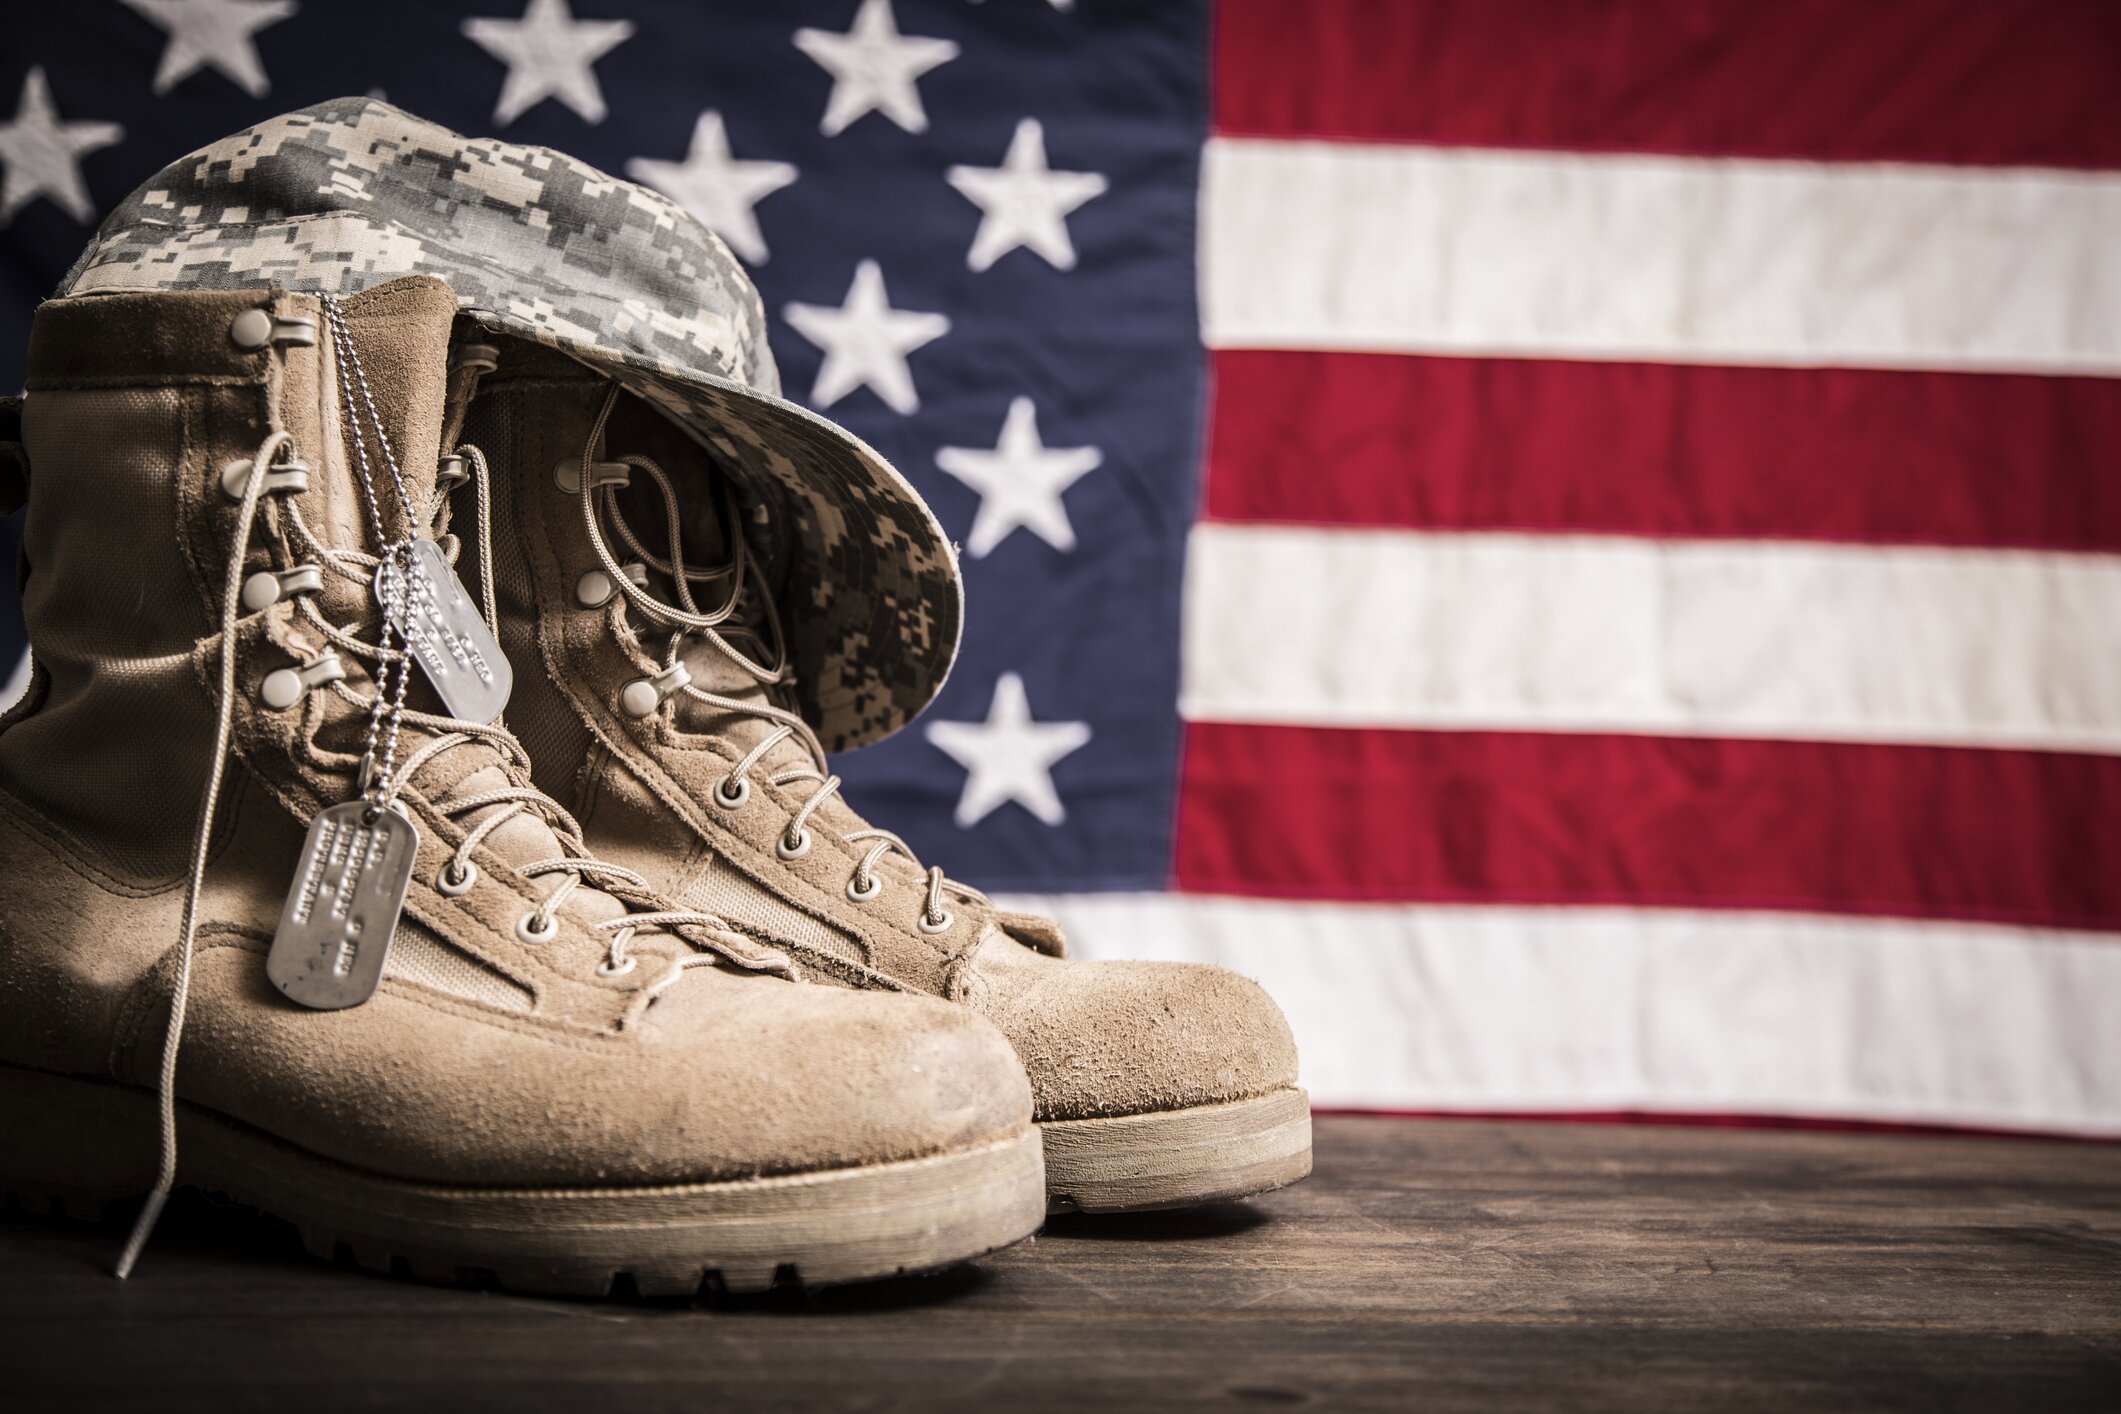 Army boots with American flag